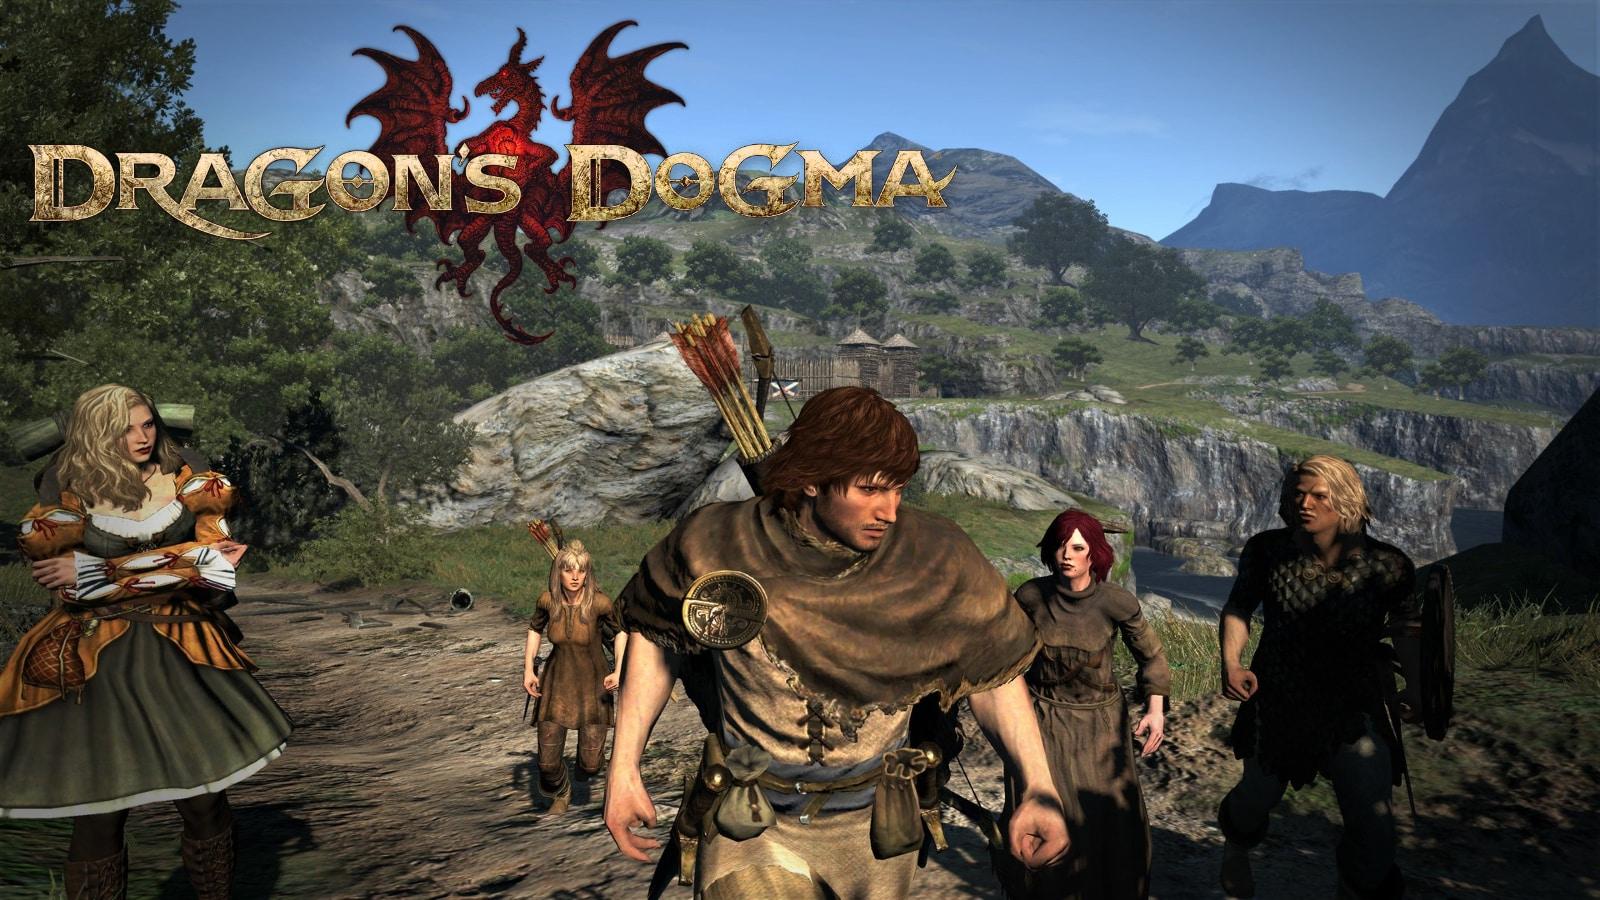 An image of Dragon's Dogma characters featured the game like Skyrim.